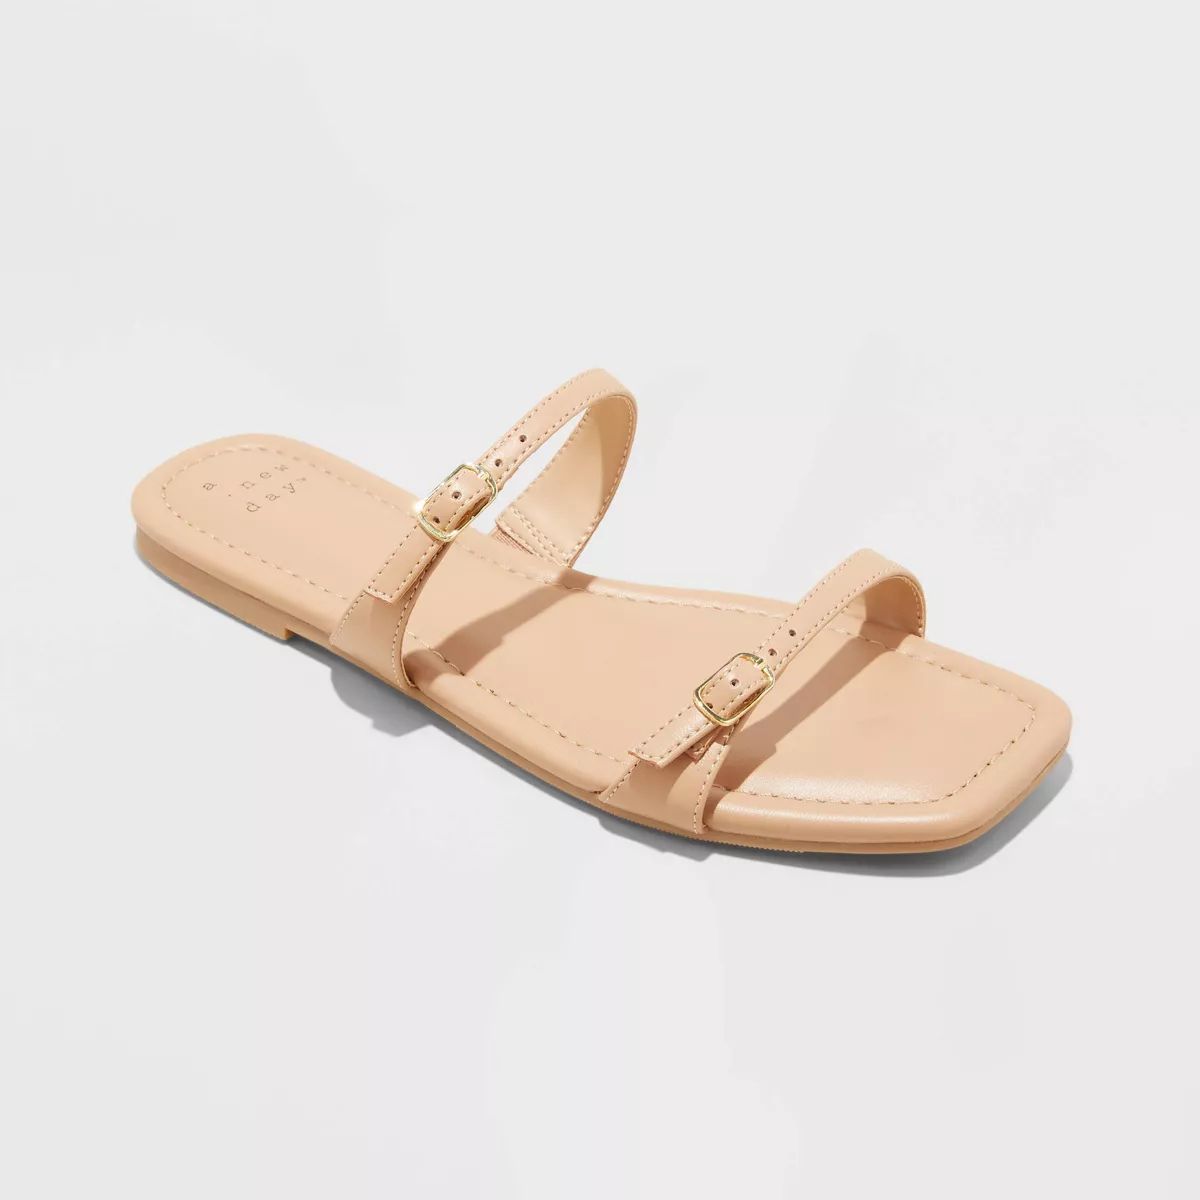 Women's Connie Two Band Buckle Slide Sandals with Memory Foam Insole - A New Day™ Tan 5 | Target